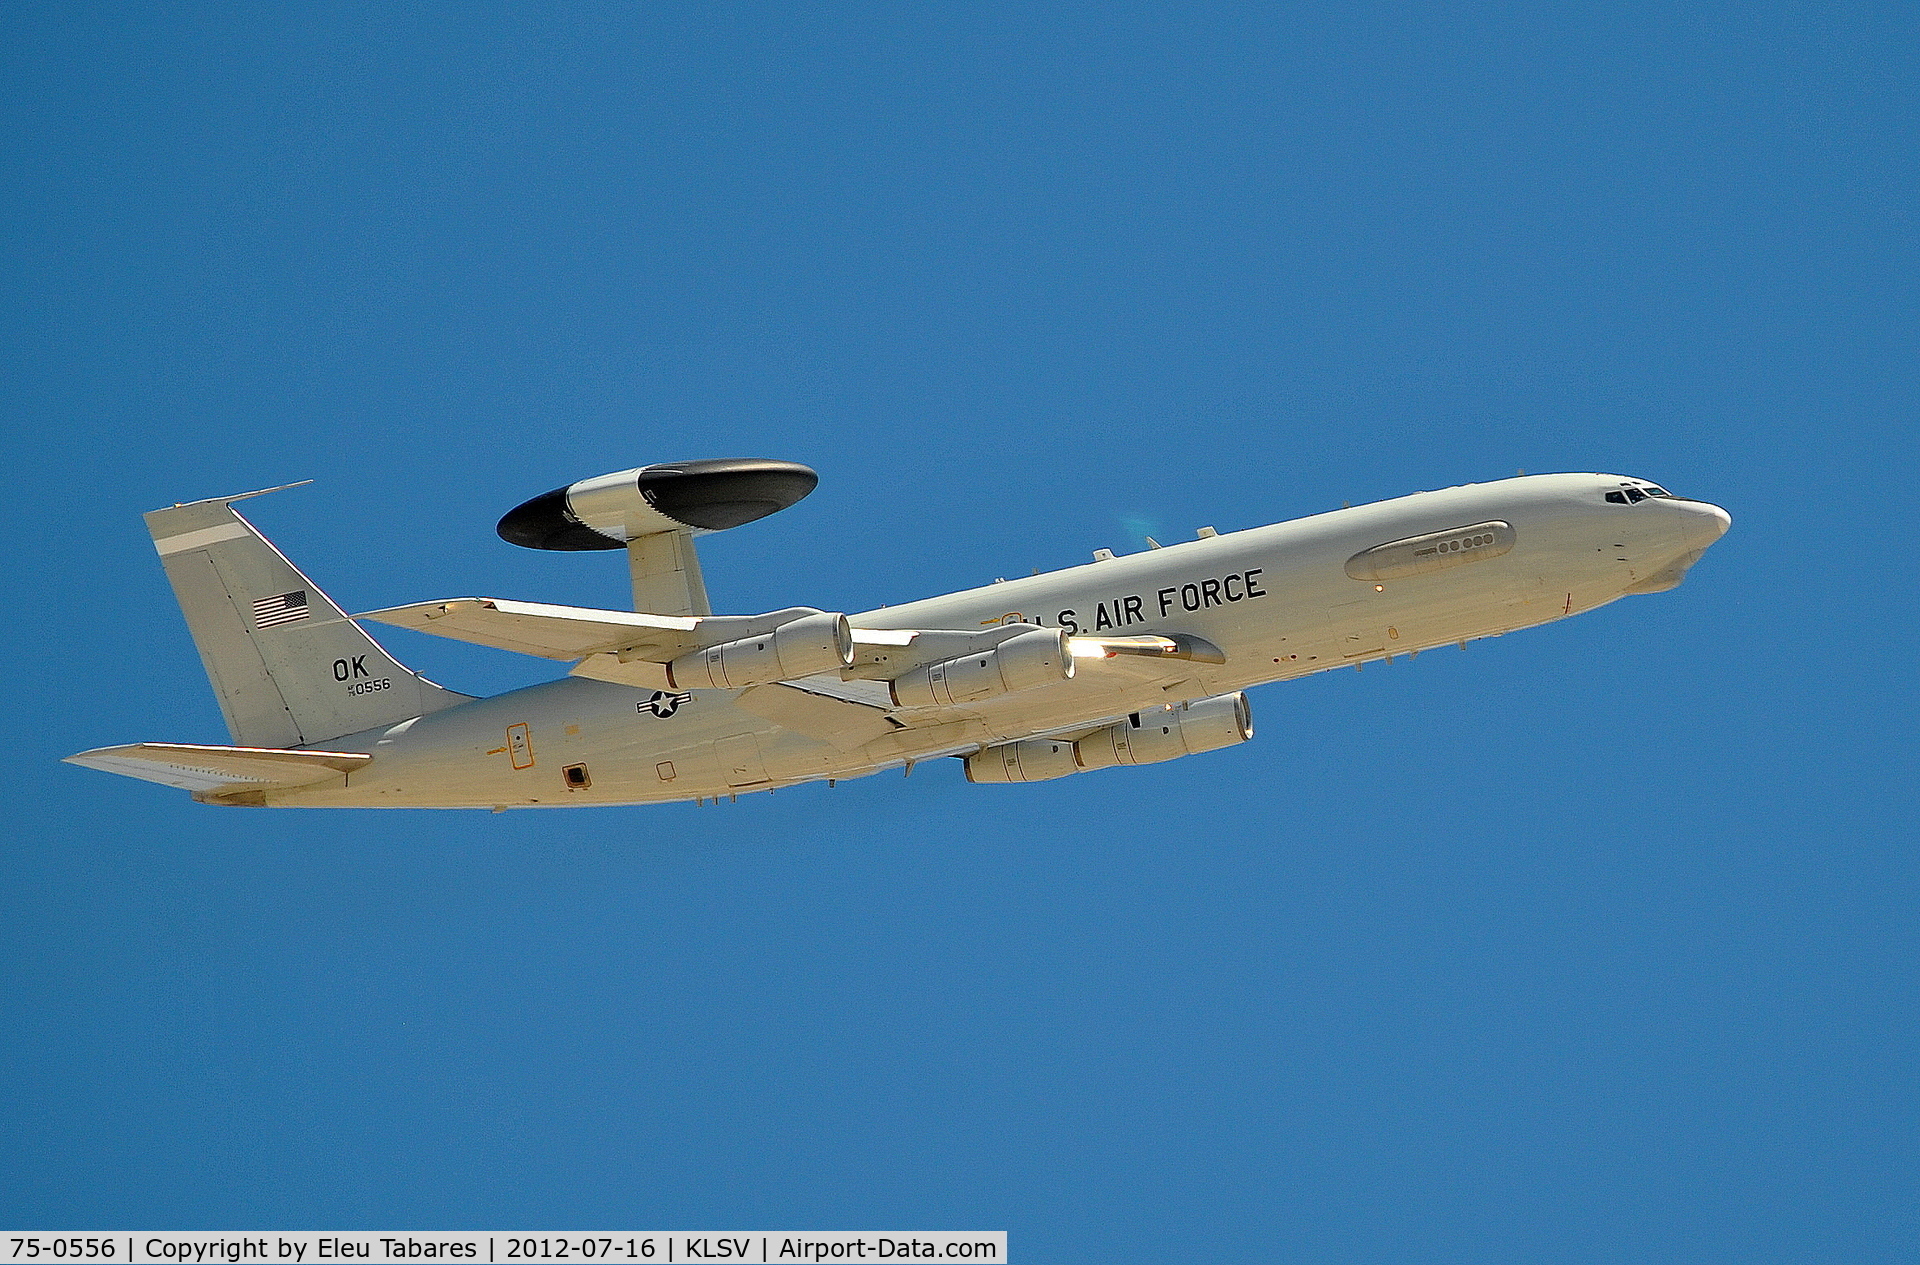 75-0556, 1975 Boeing E-3B Sentry C/N 21047, Taken during Red Flag Exercise at Nellis Air Force Base, Nevada.